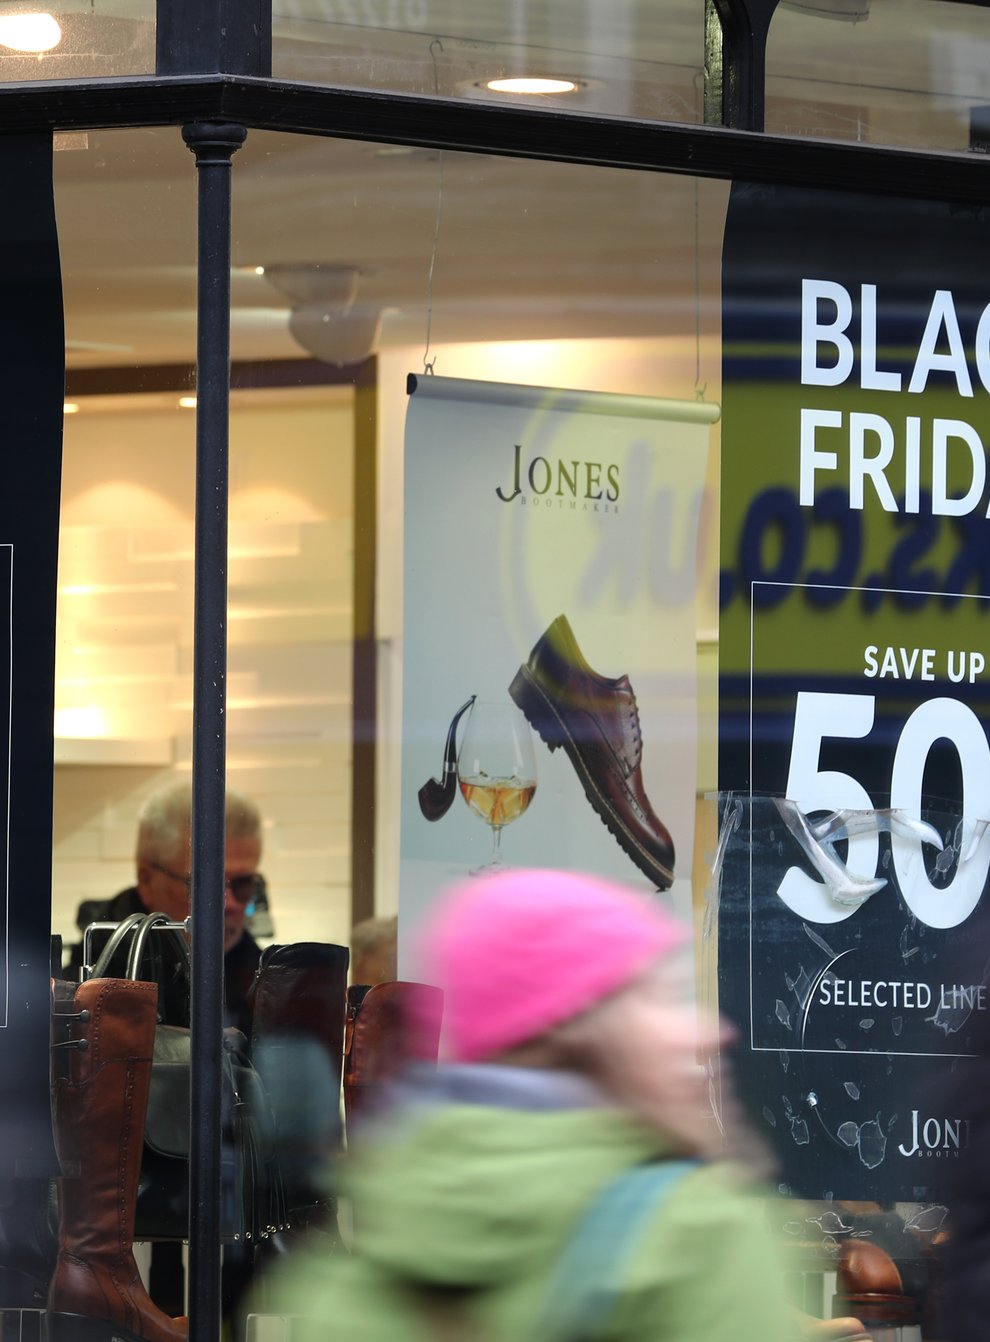 Shoppers are expected to spend £9 billion on Black Friday (Gareth Fuller/PA)